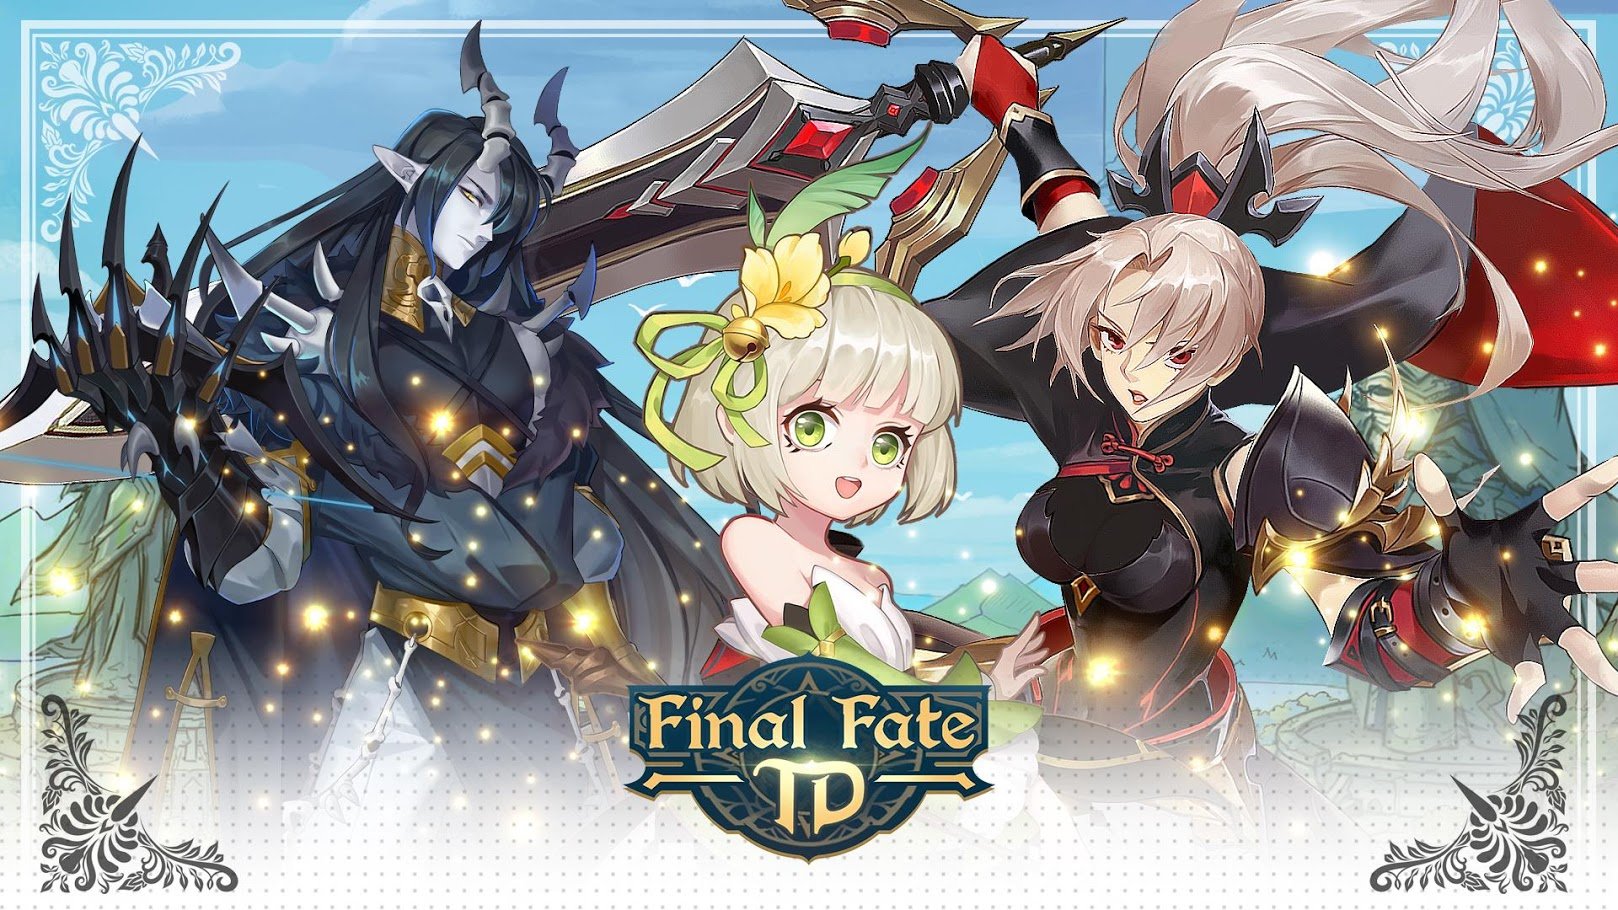 Final Fate TD Gameplay Impressions